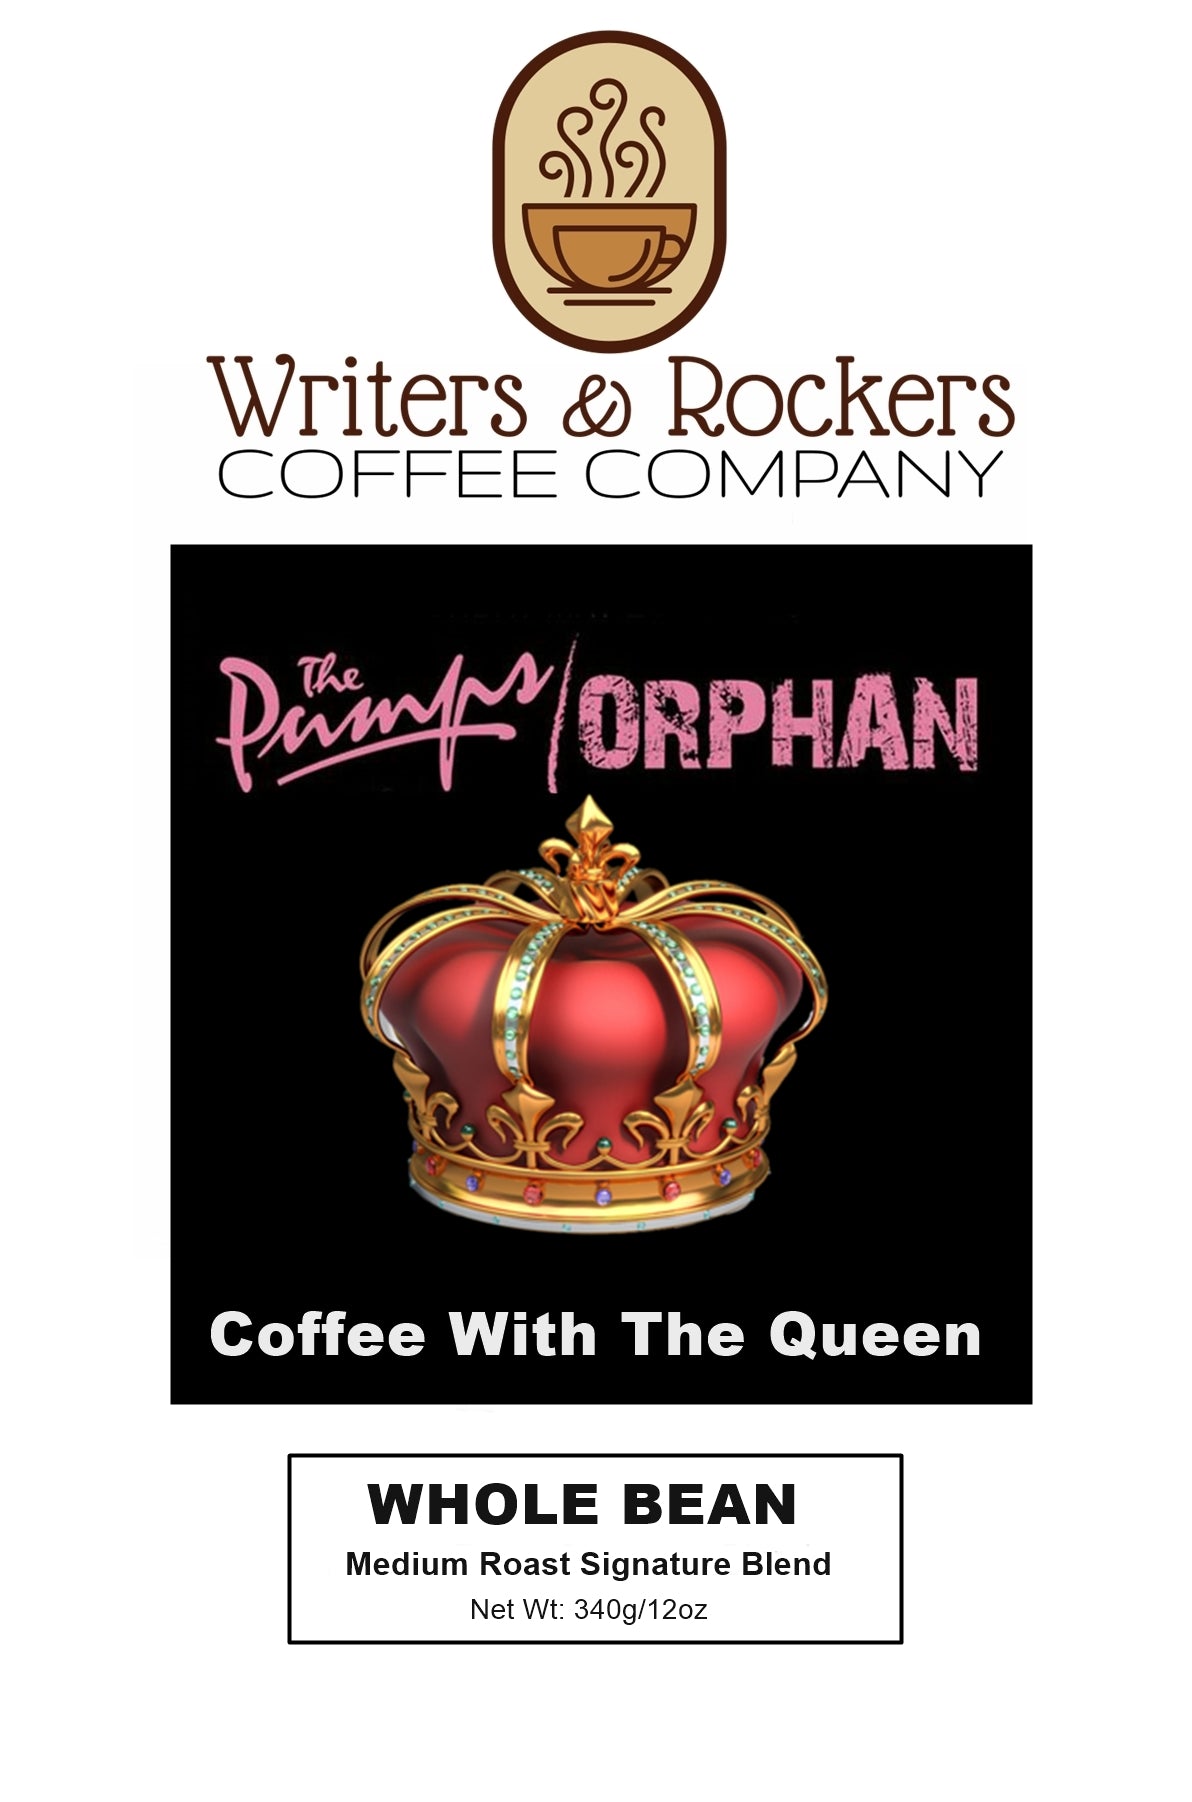 The Pumps/Orphan's Coffee With The Queen